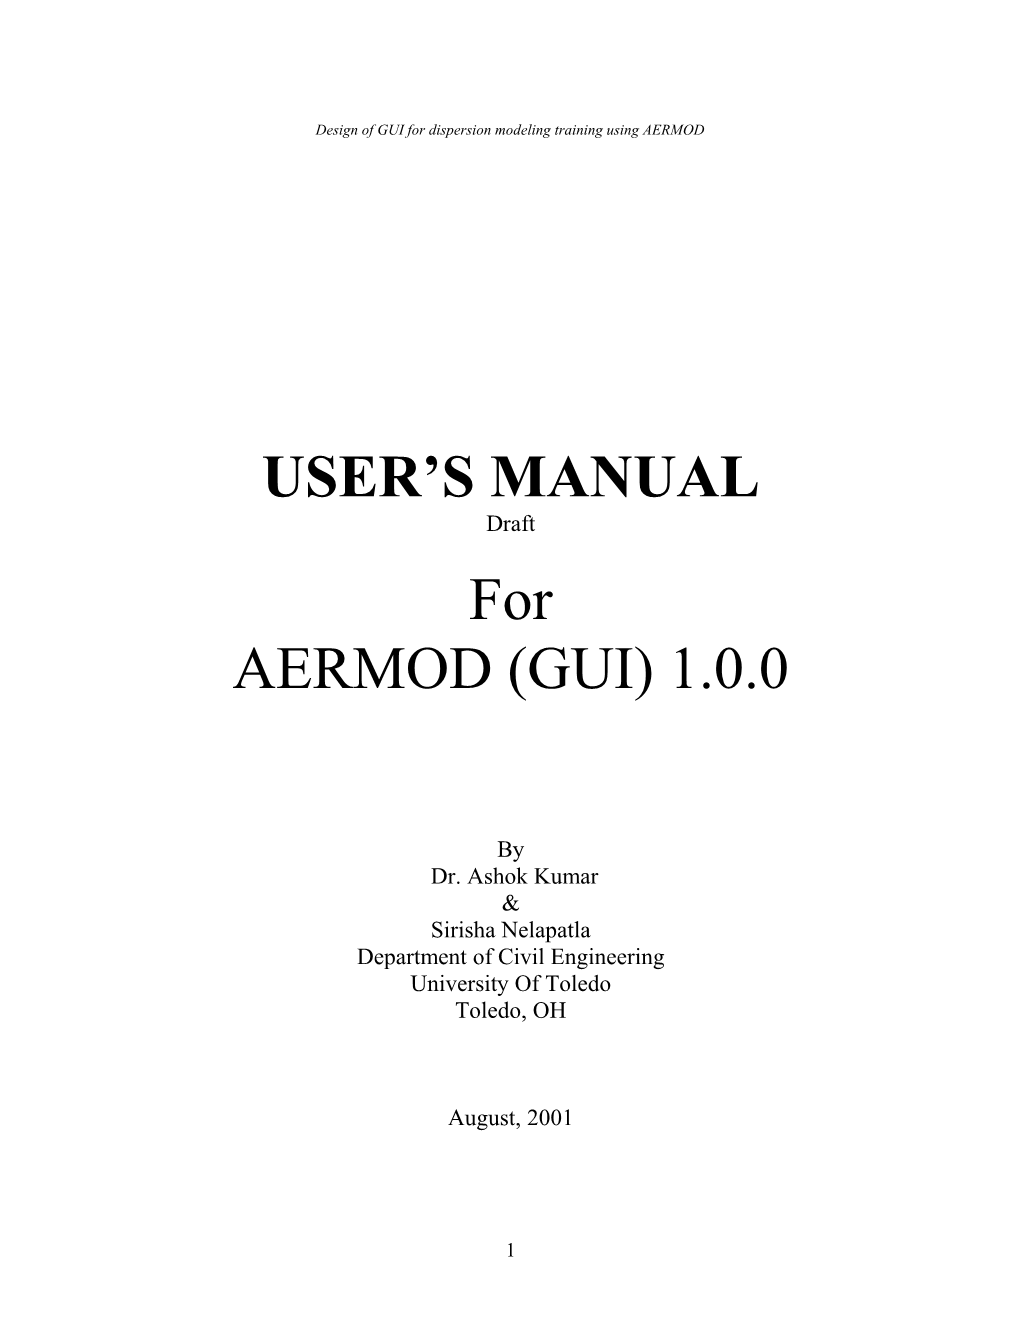 Design of GUI for Dispersion Modeling Training Using AERMOD